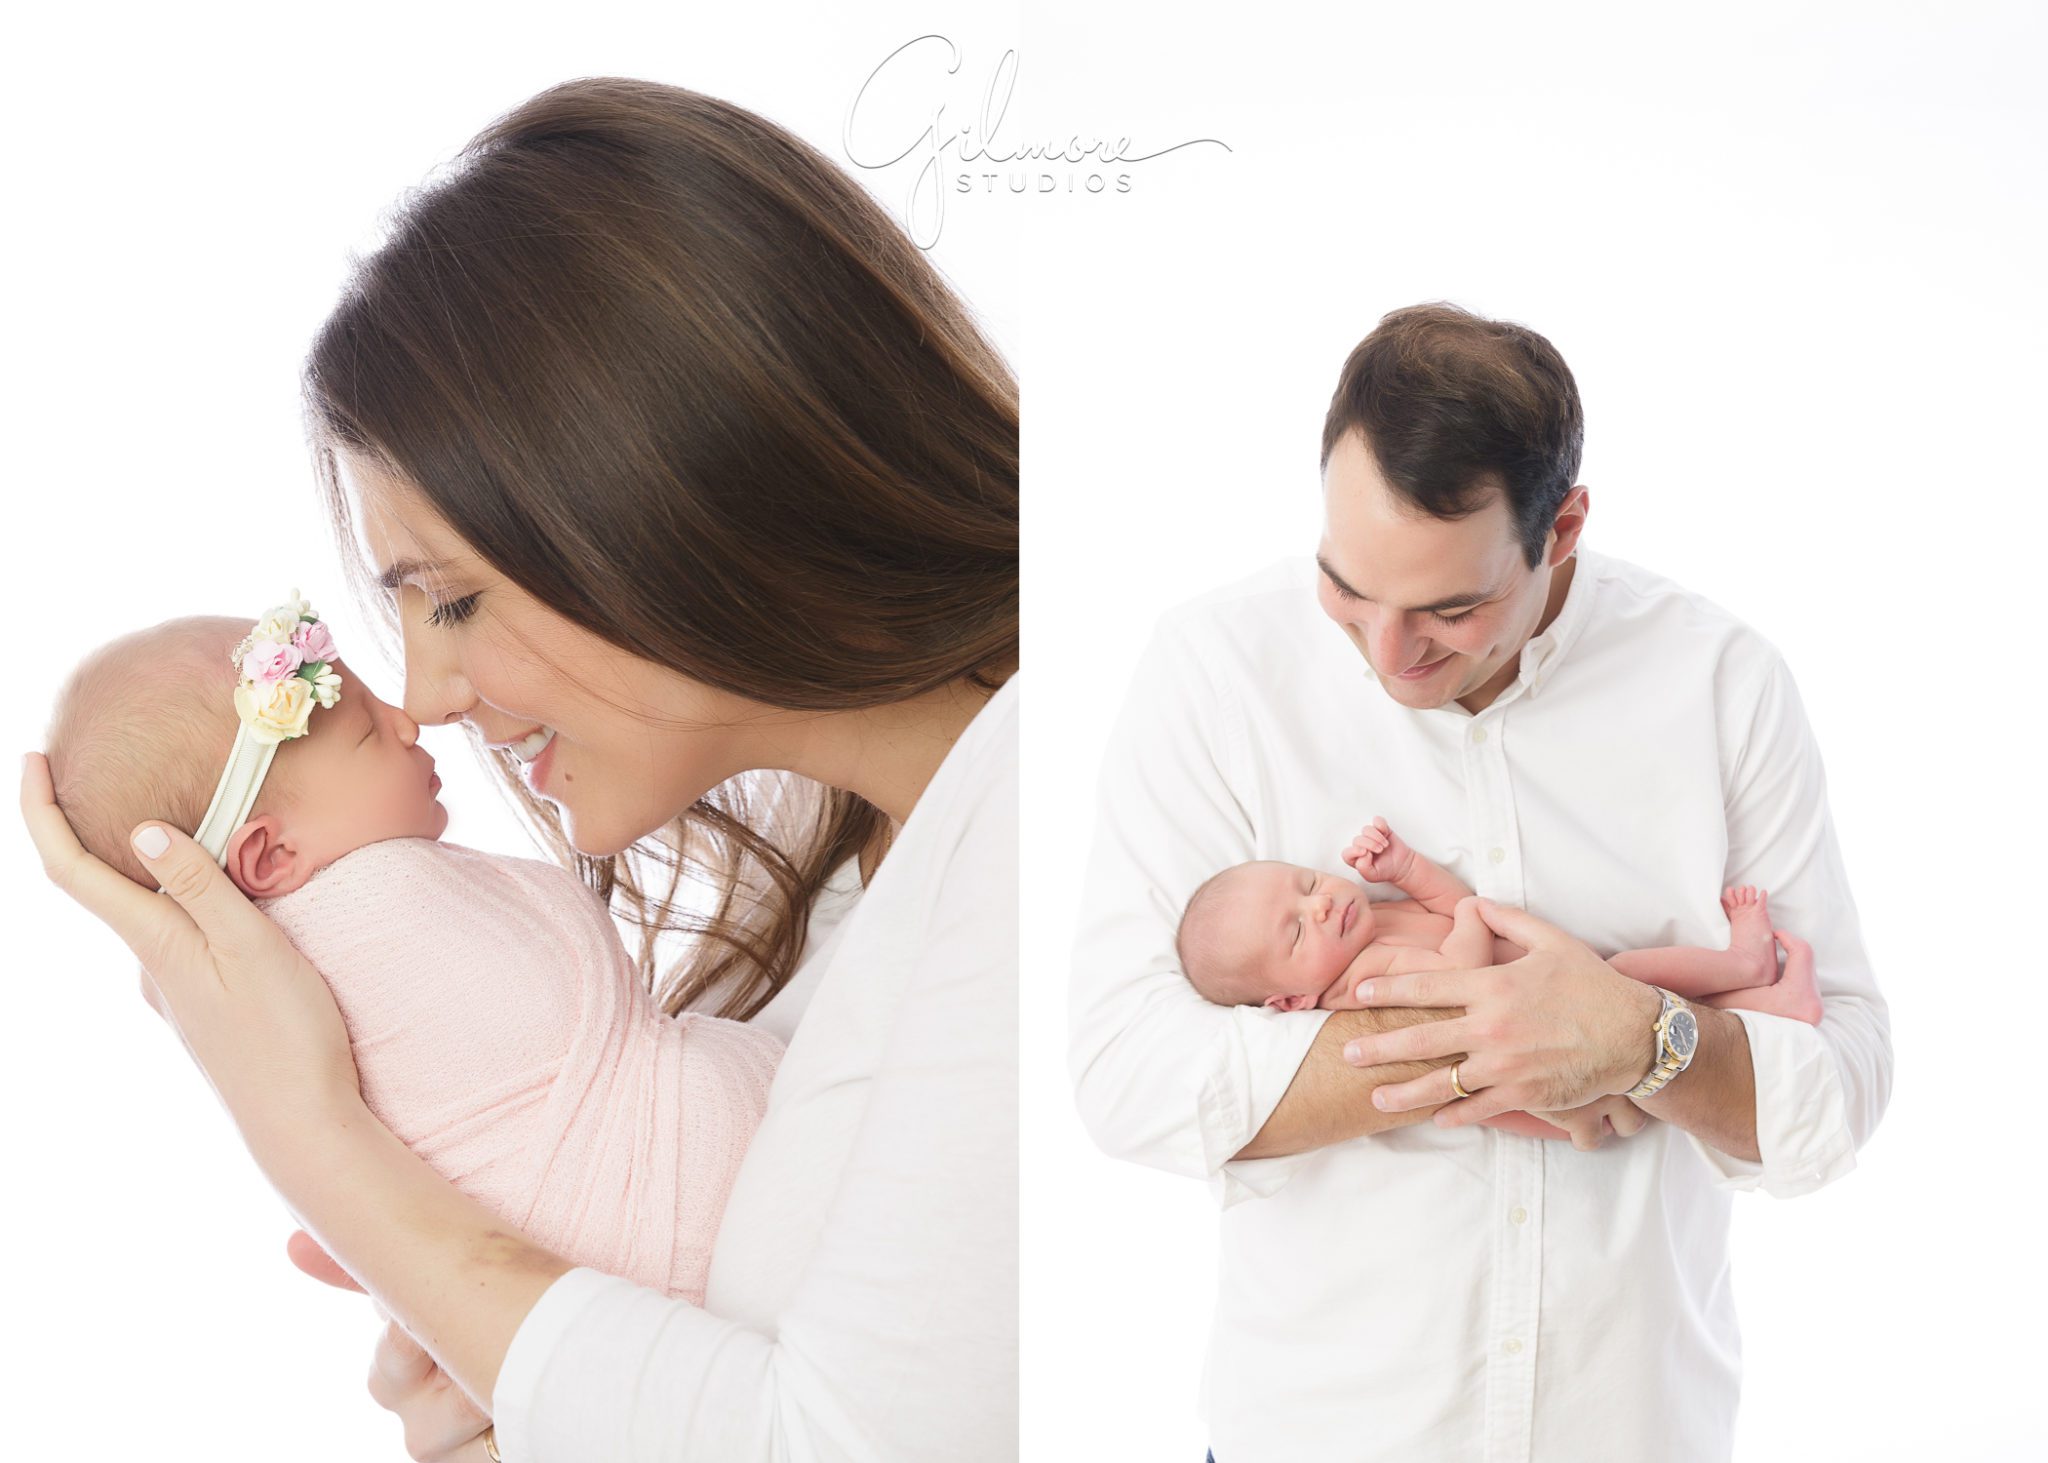 Maternity Newborn Photography, mom, dad, baby, girl, white outfits, headband, flowers, pink blanket, matching, portrait package, studio session, family